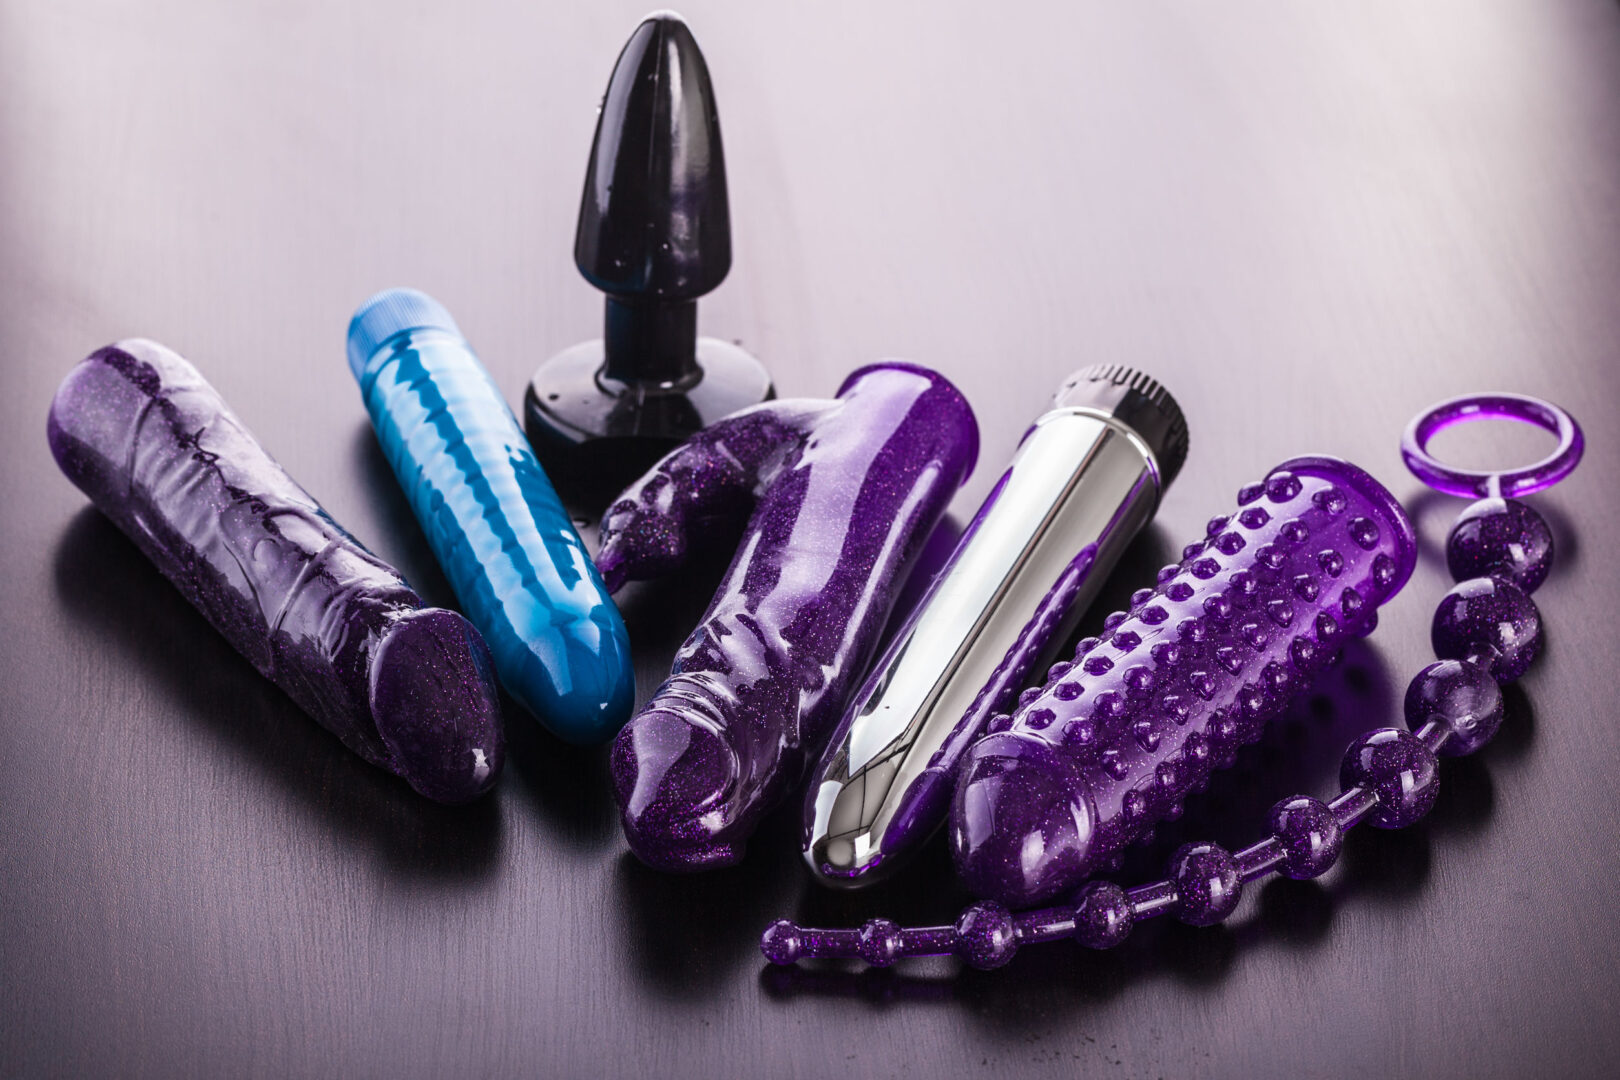 a collection of different types of sextoys, including dildo, vibrators and butt plugs over a dark wooden surface